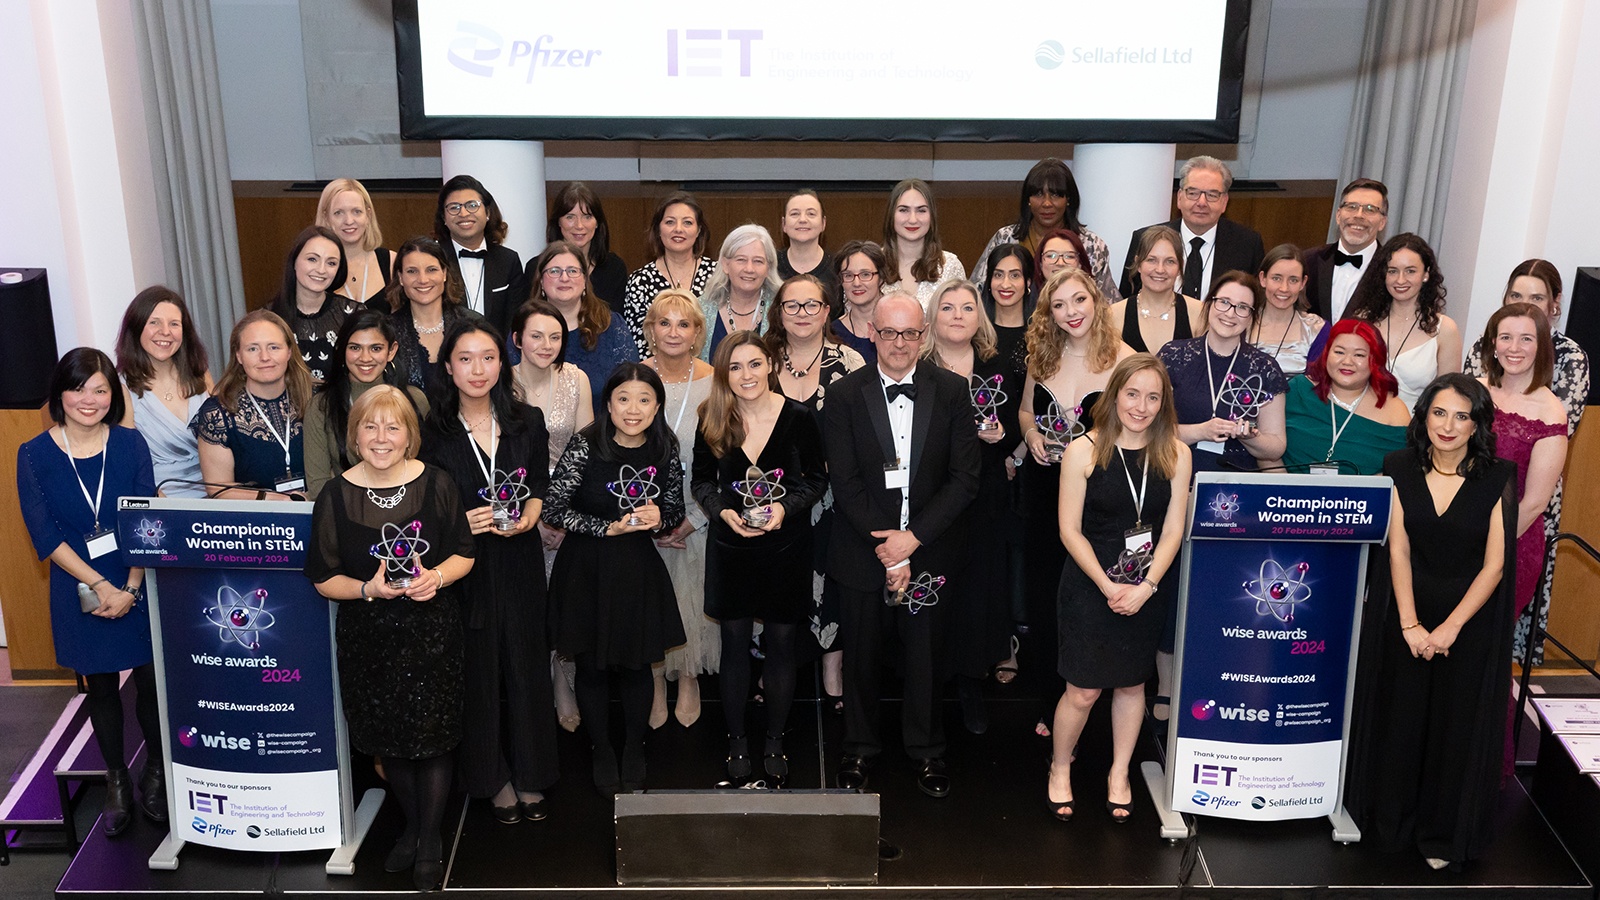 IET and WISE join forces to accelerate gender equality in STEM